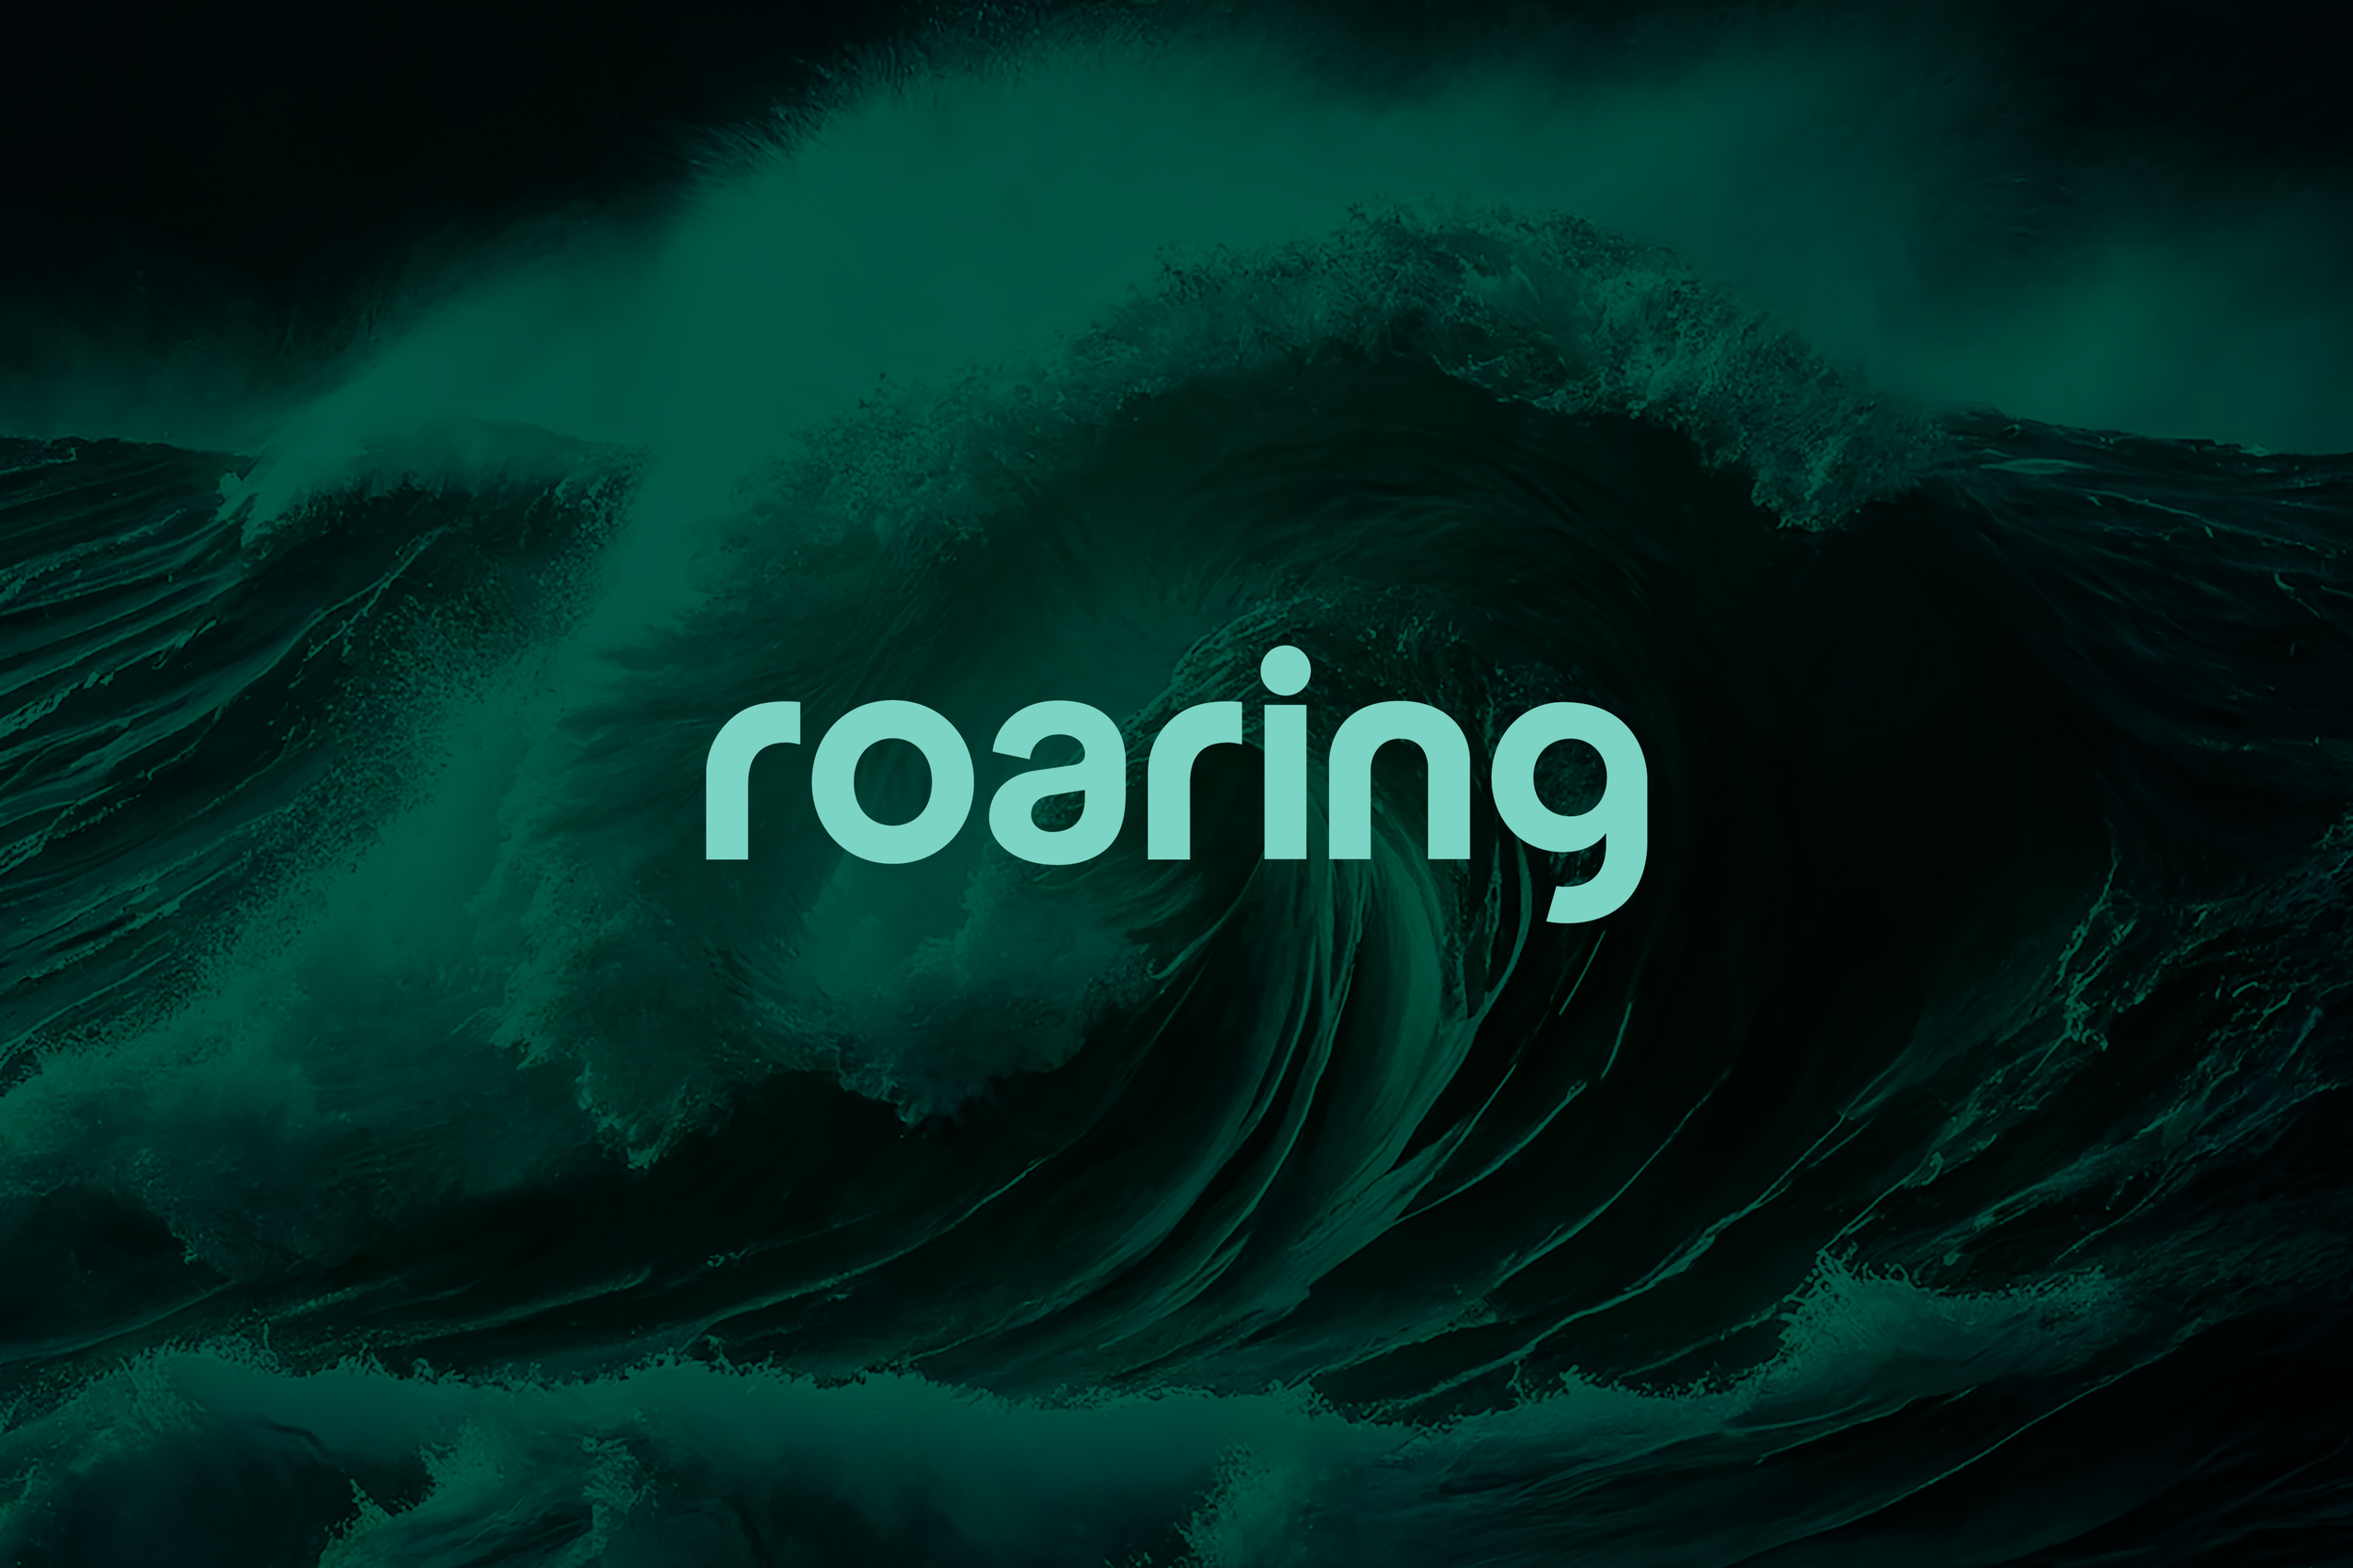 Roaring’s look is evolving – our promise stays the same